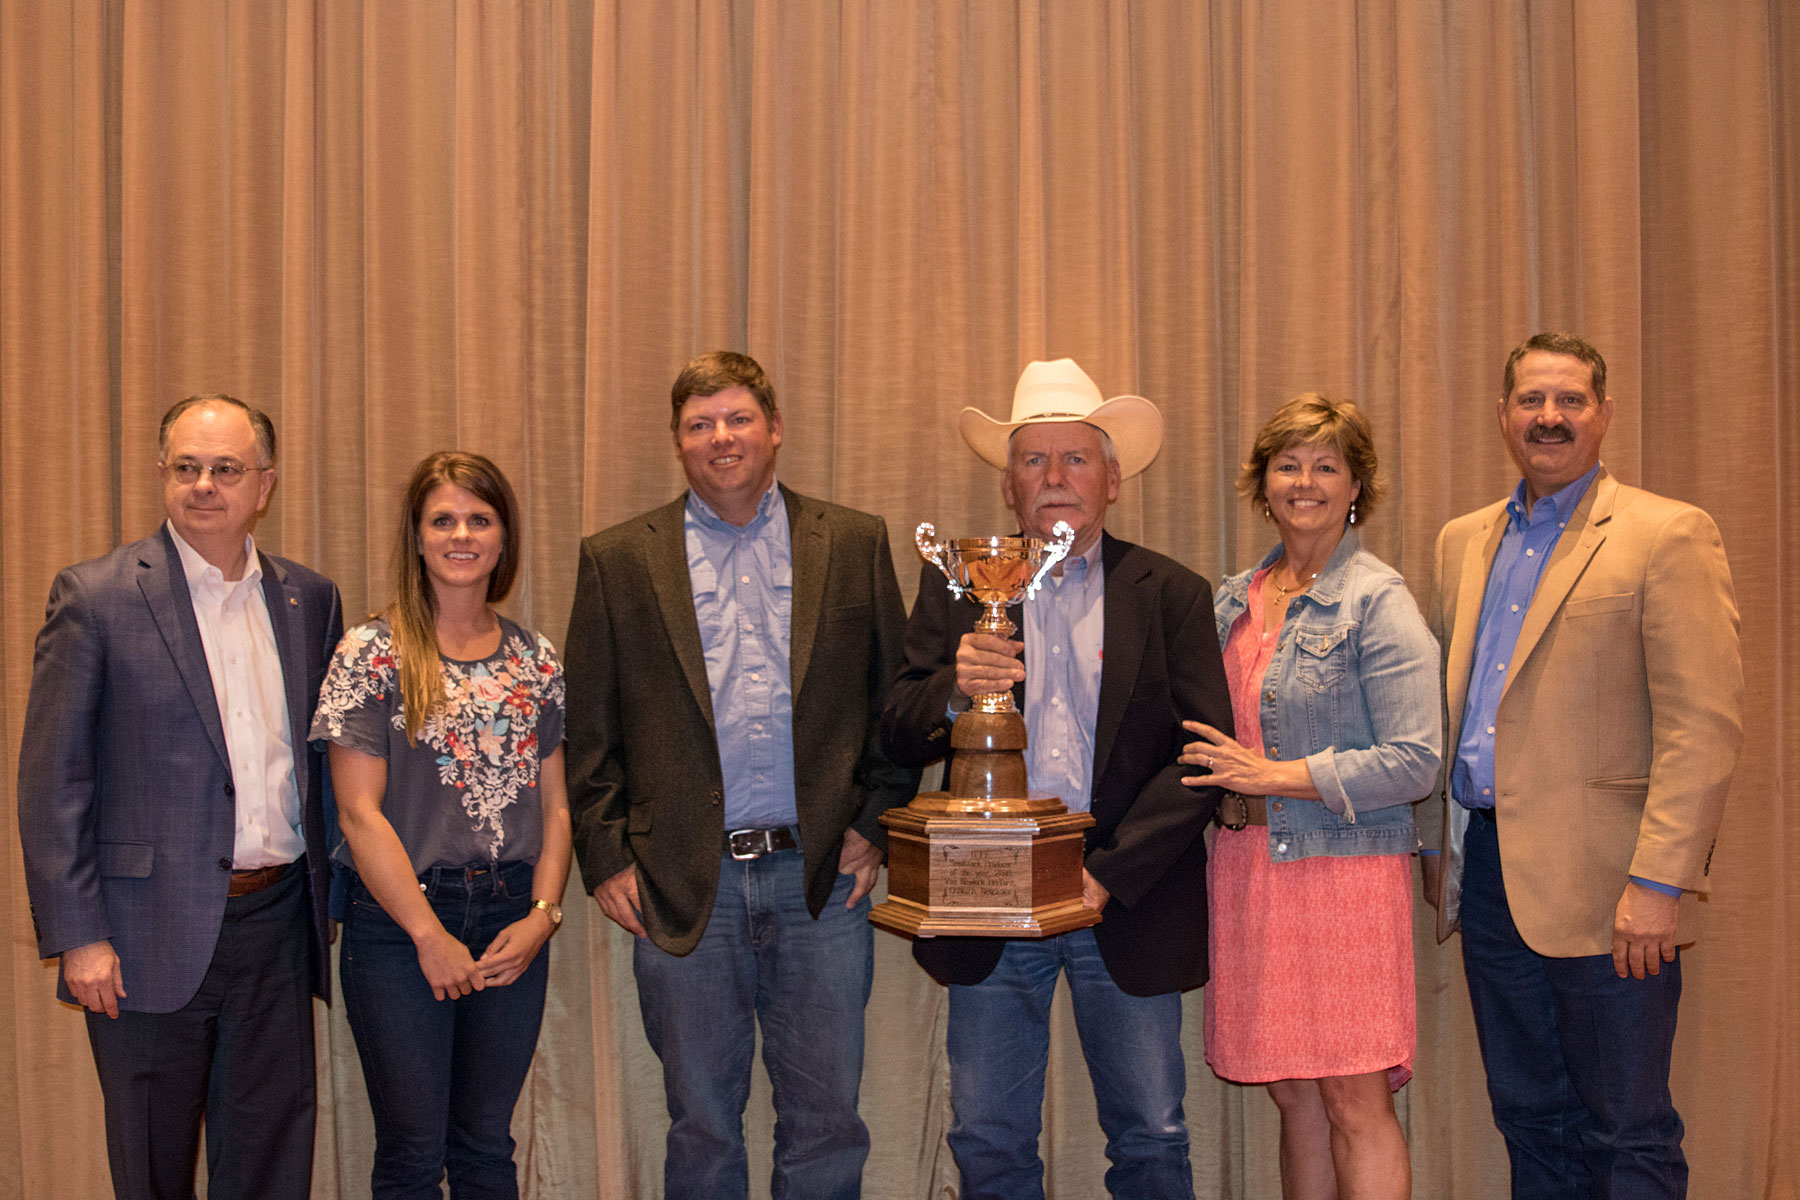 Van Newkirk, Oshkosh, NE, was named the 2018 BIF Seedstock Producer of the Year. Pictured are Steve May, BEEF magazine, award sponsor; Sara, Kolby, Joe and Cyndi Van Newkirk; and Donnell Brown, 2017-2018 BIF president.  Photo courtesy of Angie Denton.